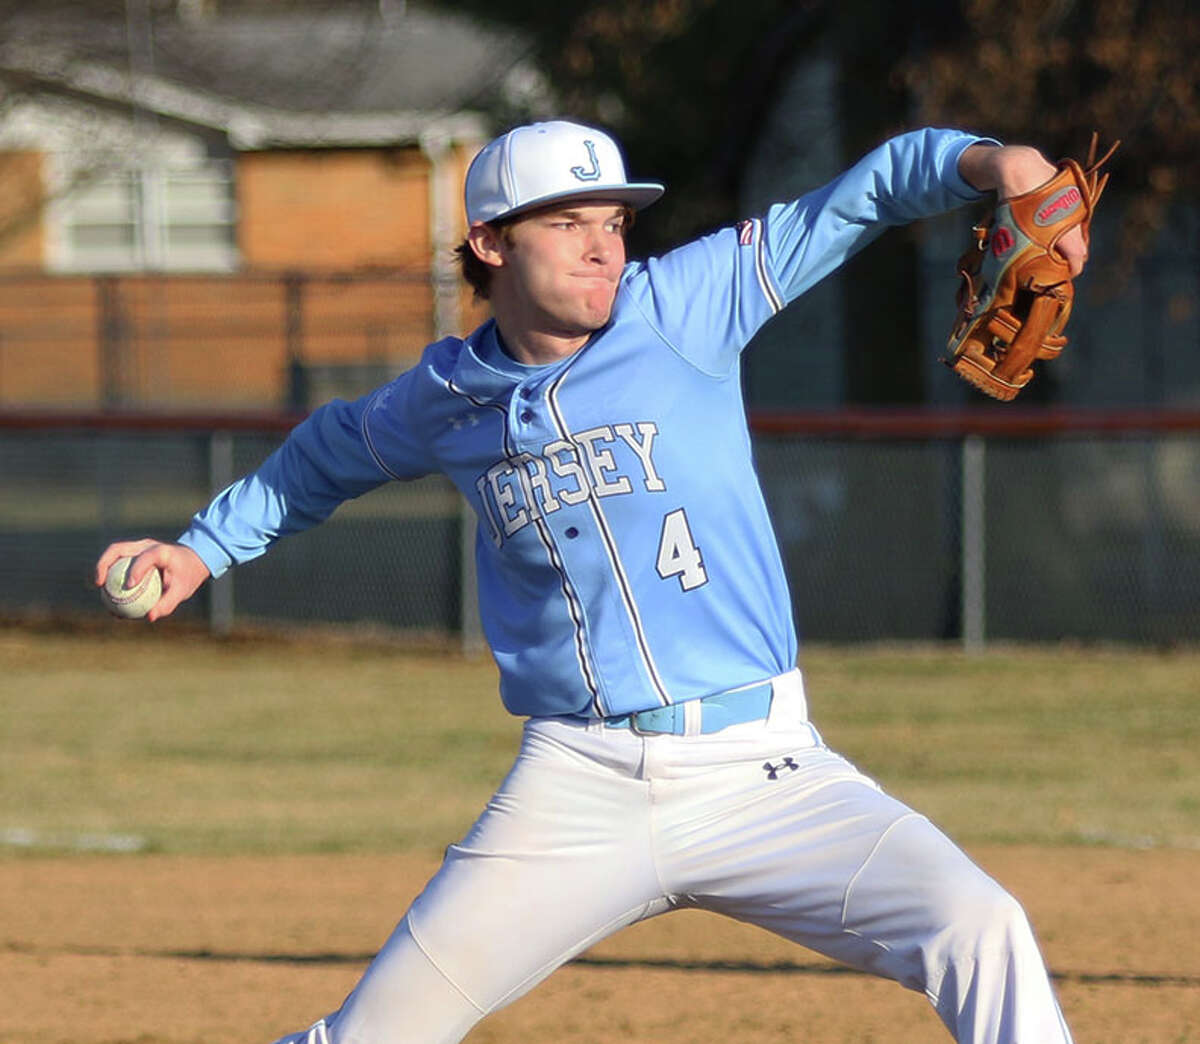 Jersey's Jacob Wagner delivers a pitch in the Panthers' season opener on March 14 in Gillespie. The Panthers are off to a 5-0 start, their best since 7-0 25 years ago.